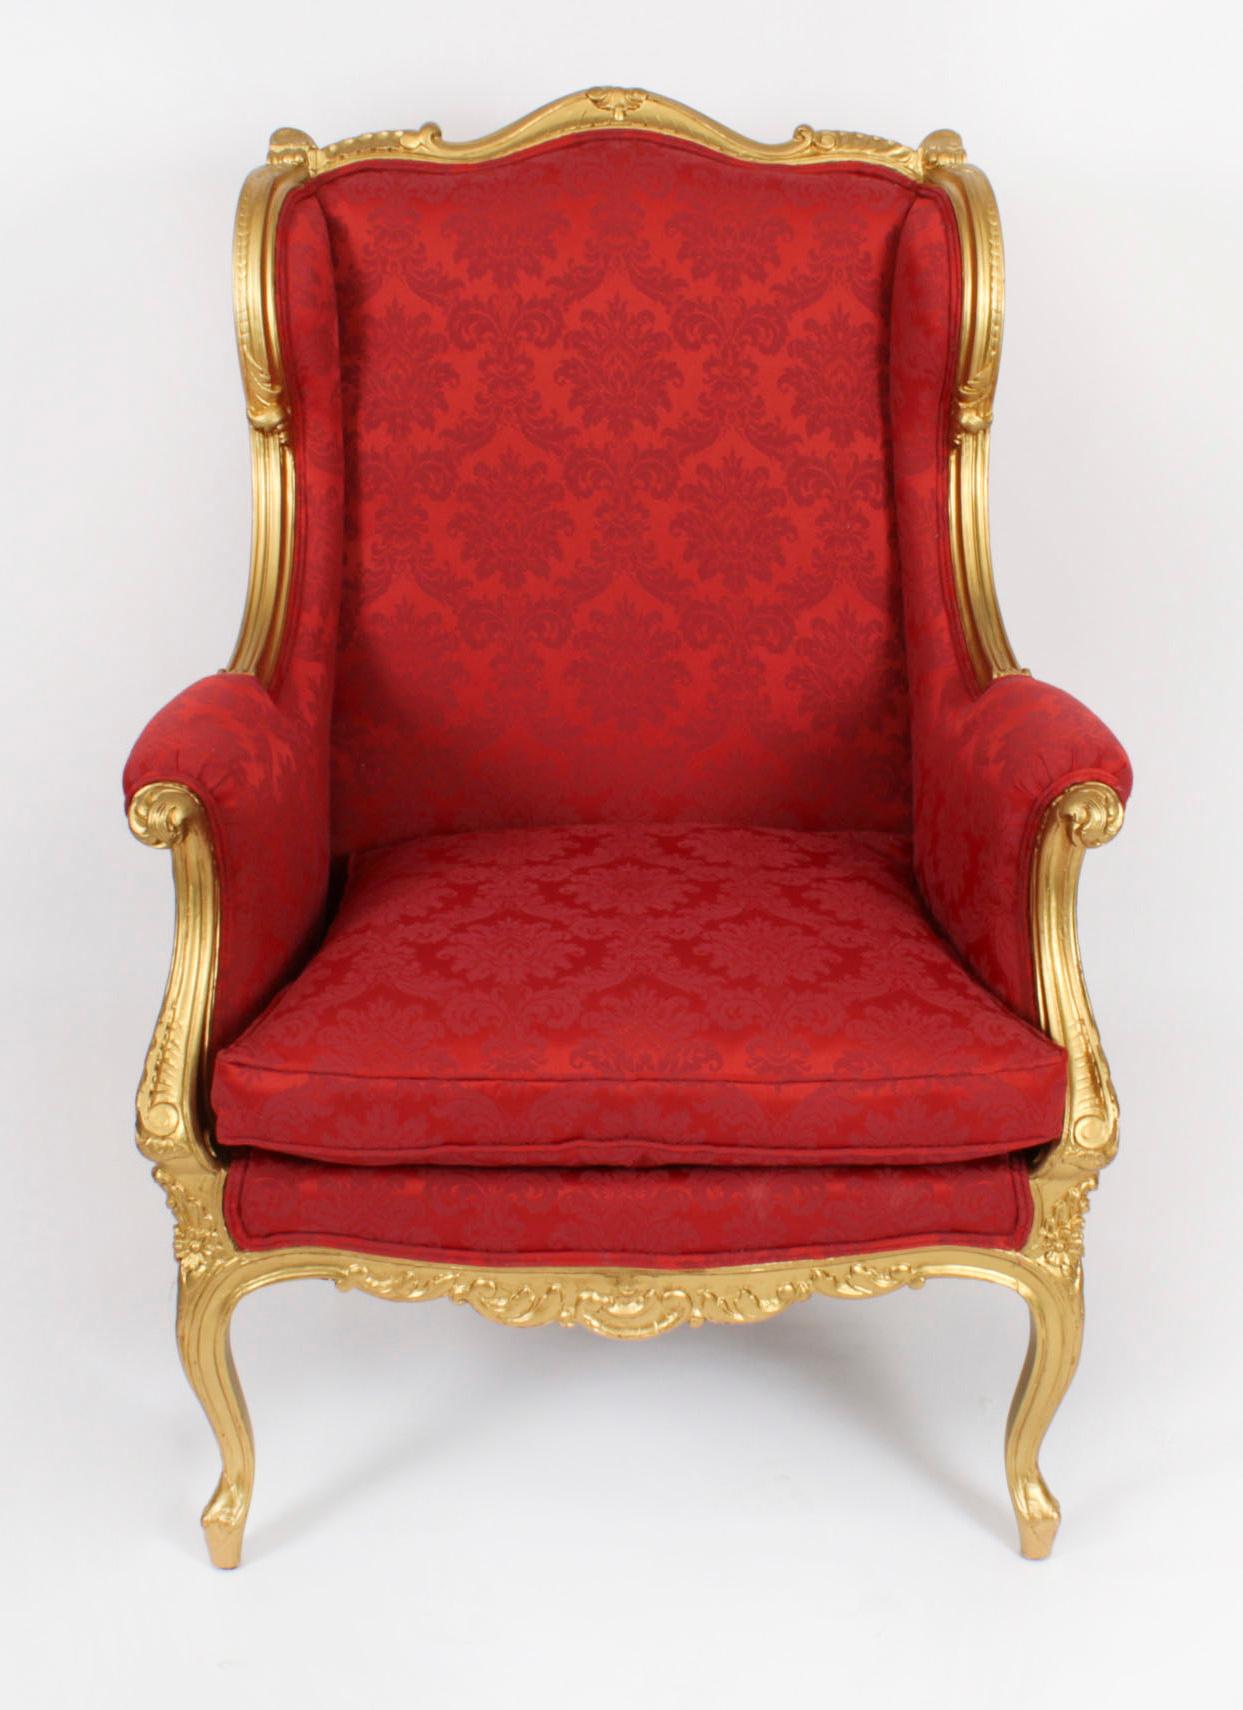 This is a beautiful antique French Louis XV revival carved giltwood tub shaped Bergère, dating from circa 1880.

The wingback armchair with hand-sculpted giltwood frame that envelopes the plush claret damask fabric upholstery all around, with